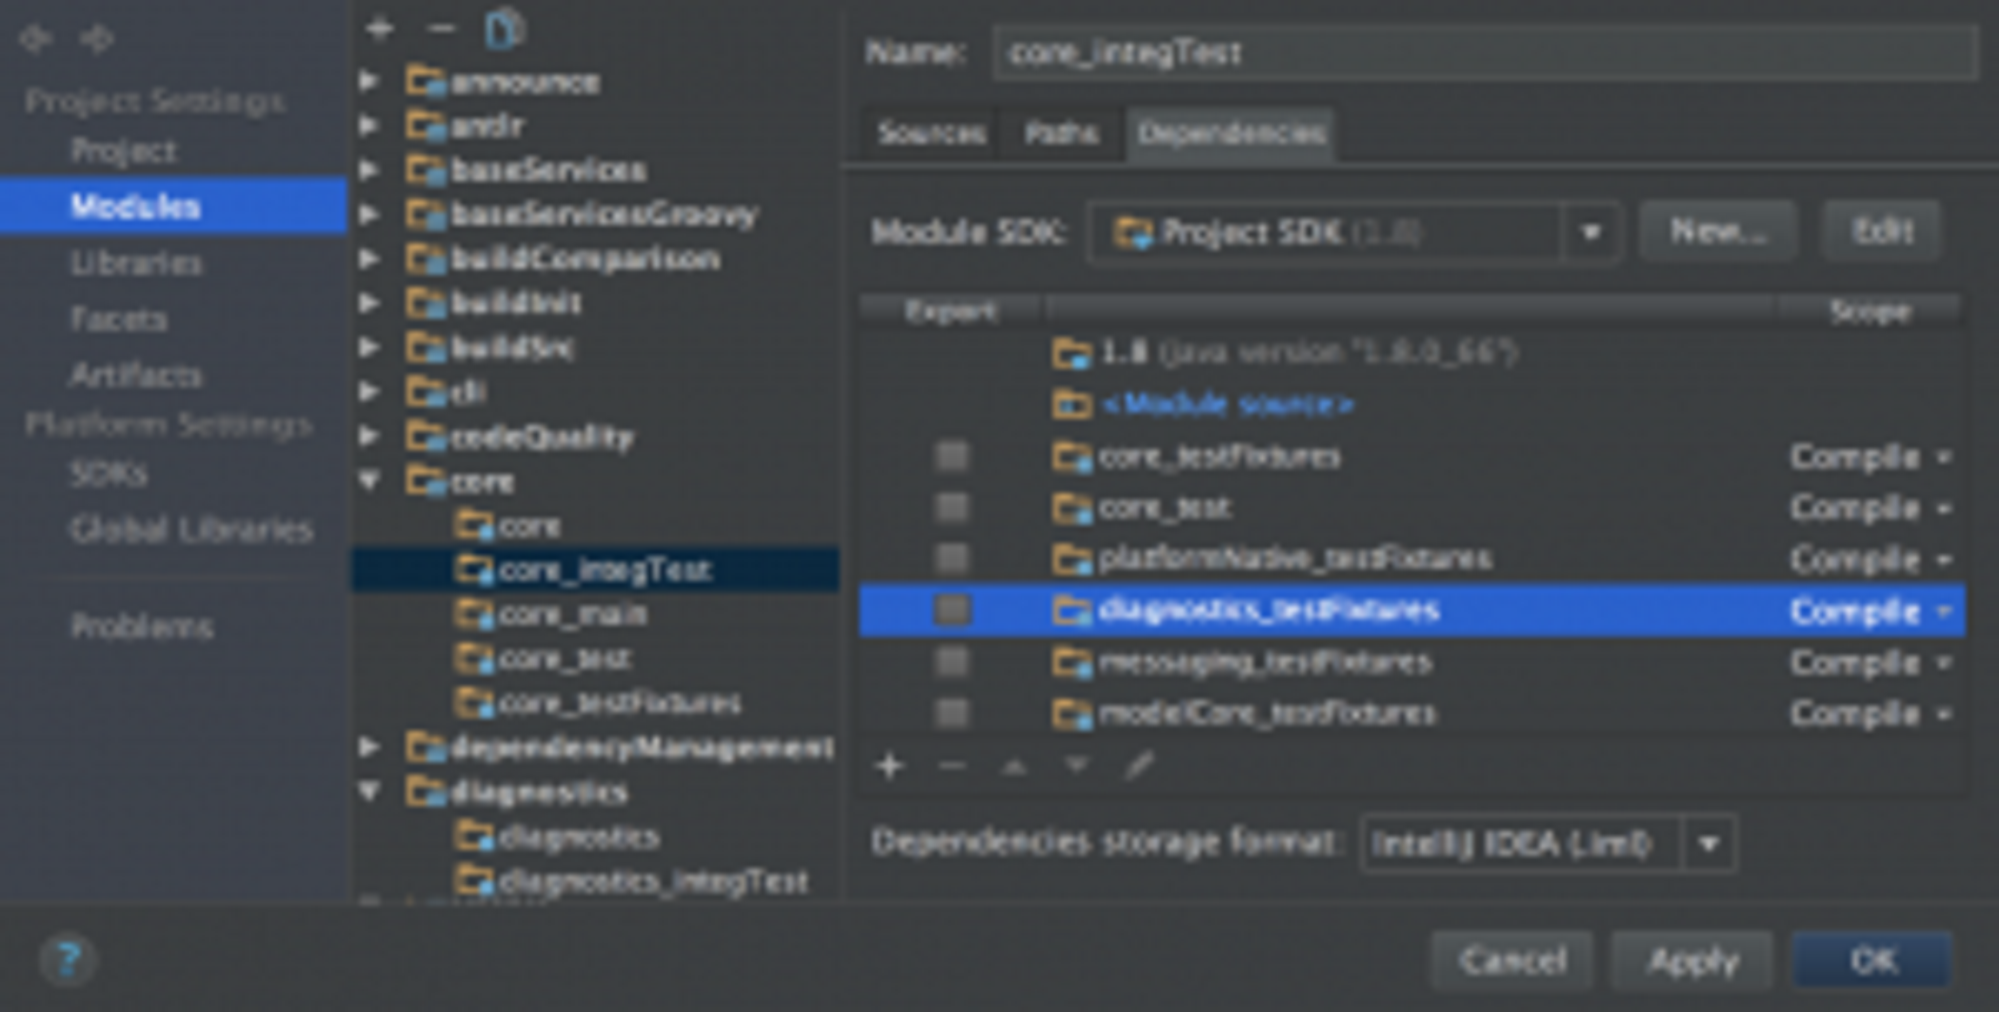 Intellij Idea Ultimate 2021.3.1 Crack With Activation Code Free Download 